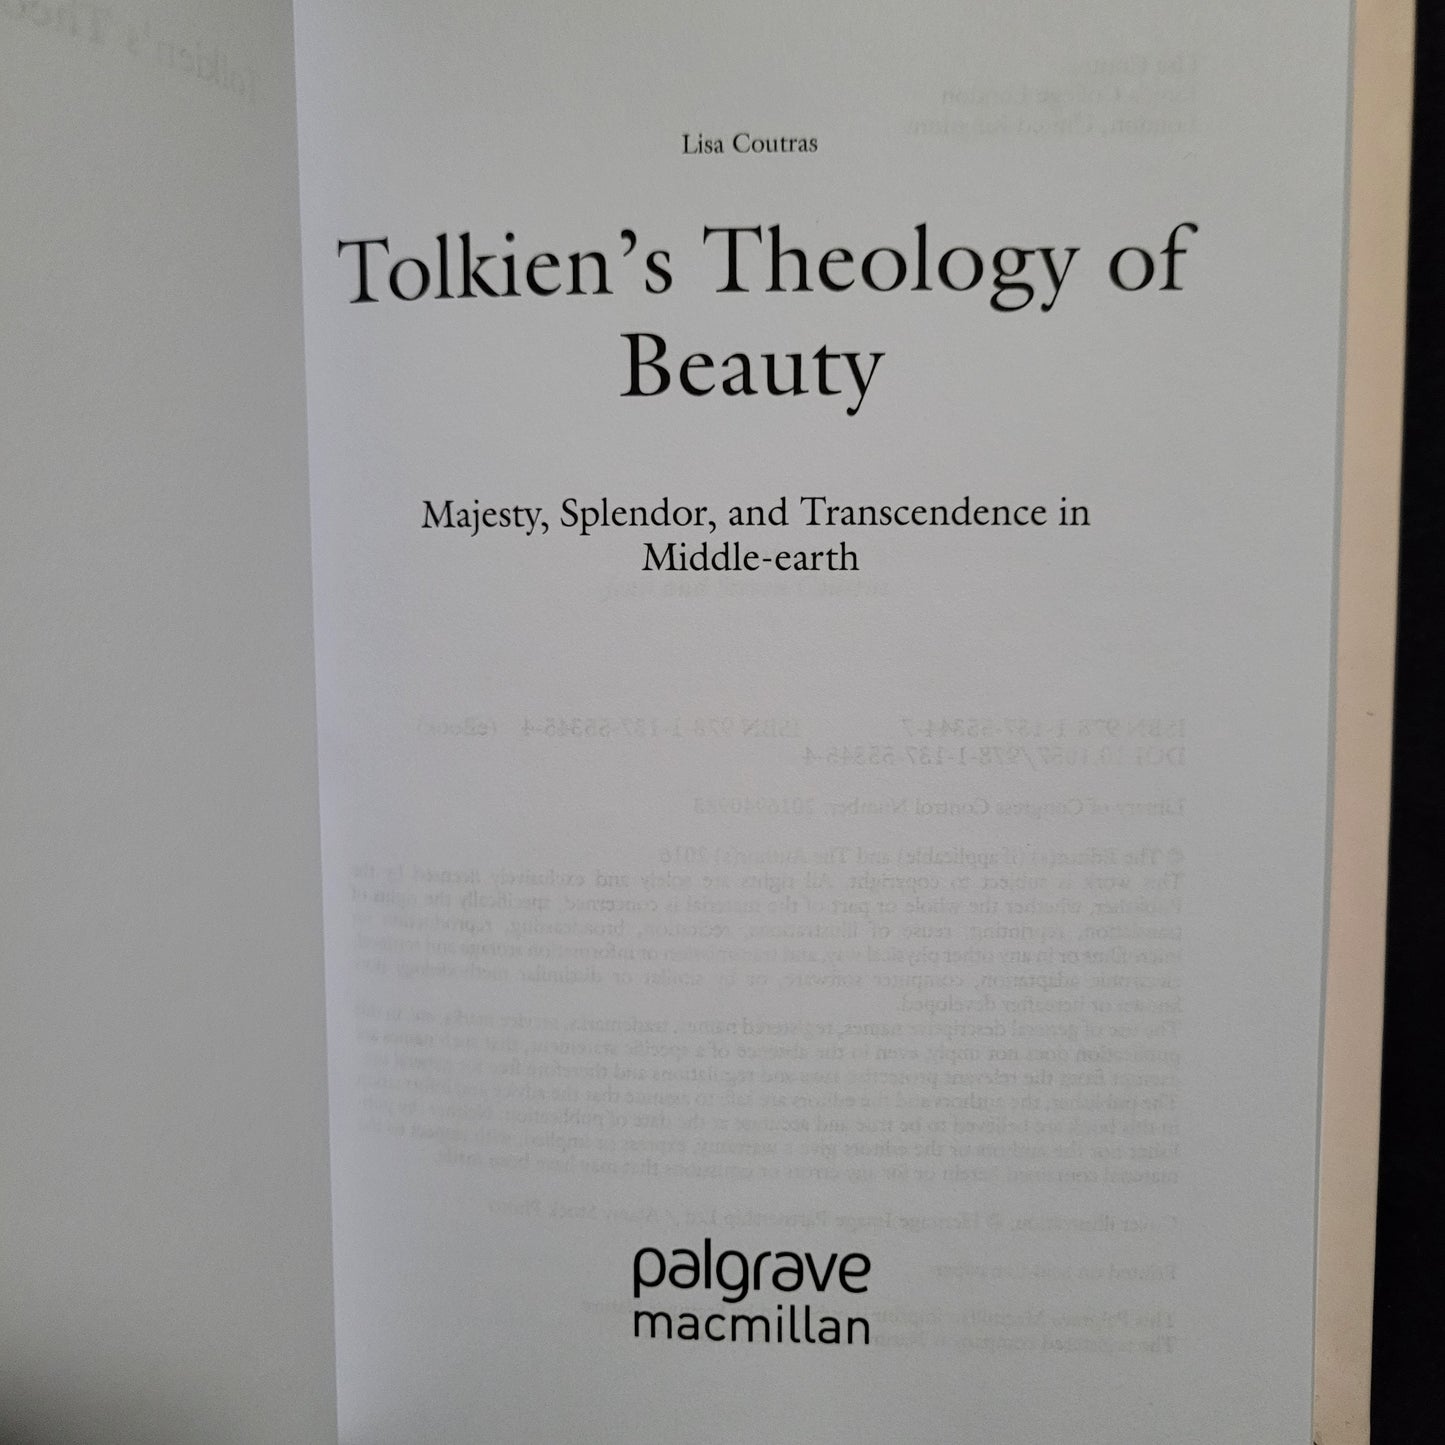 Tolkien's Theology of Beauty: Majesty, Splendor, and Transcendence in Middle-earth by Lisa Coutras (Palgrave Macmillan, 2016) Hardcover